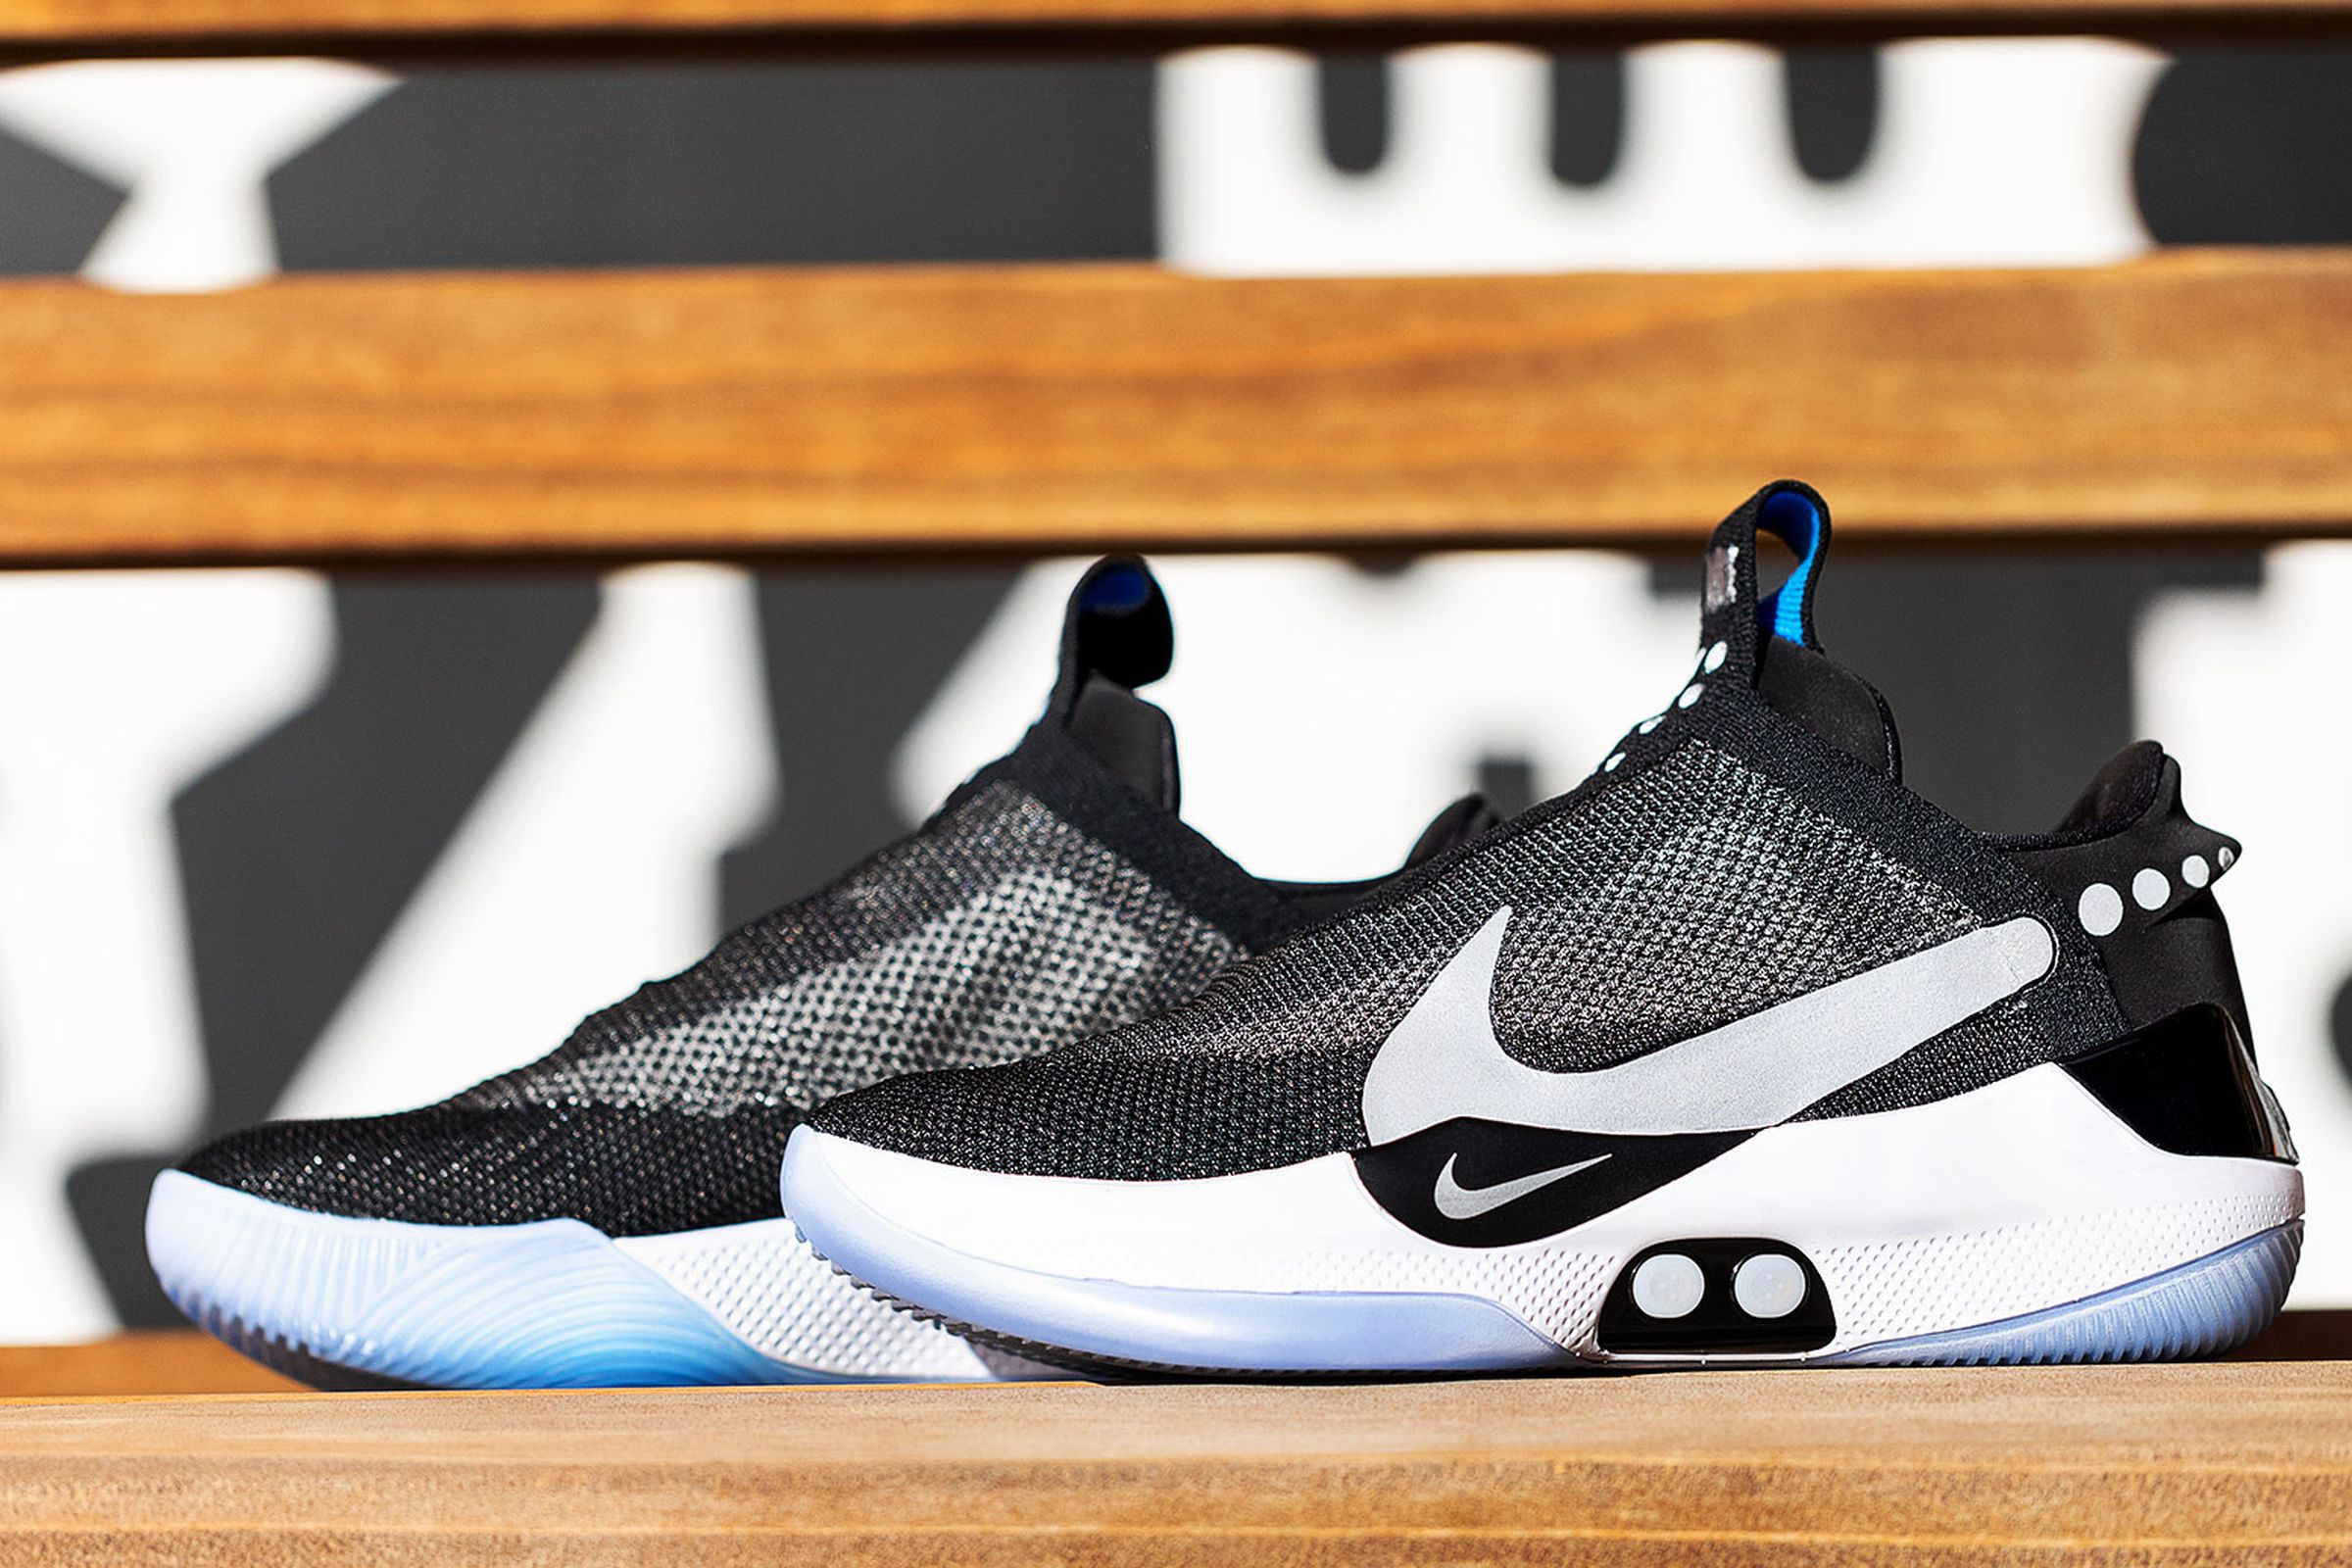 The Nike Adapt BB self-lacing basketball sneakers on a bench.